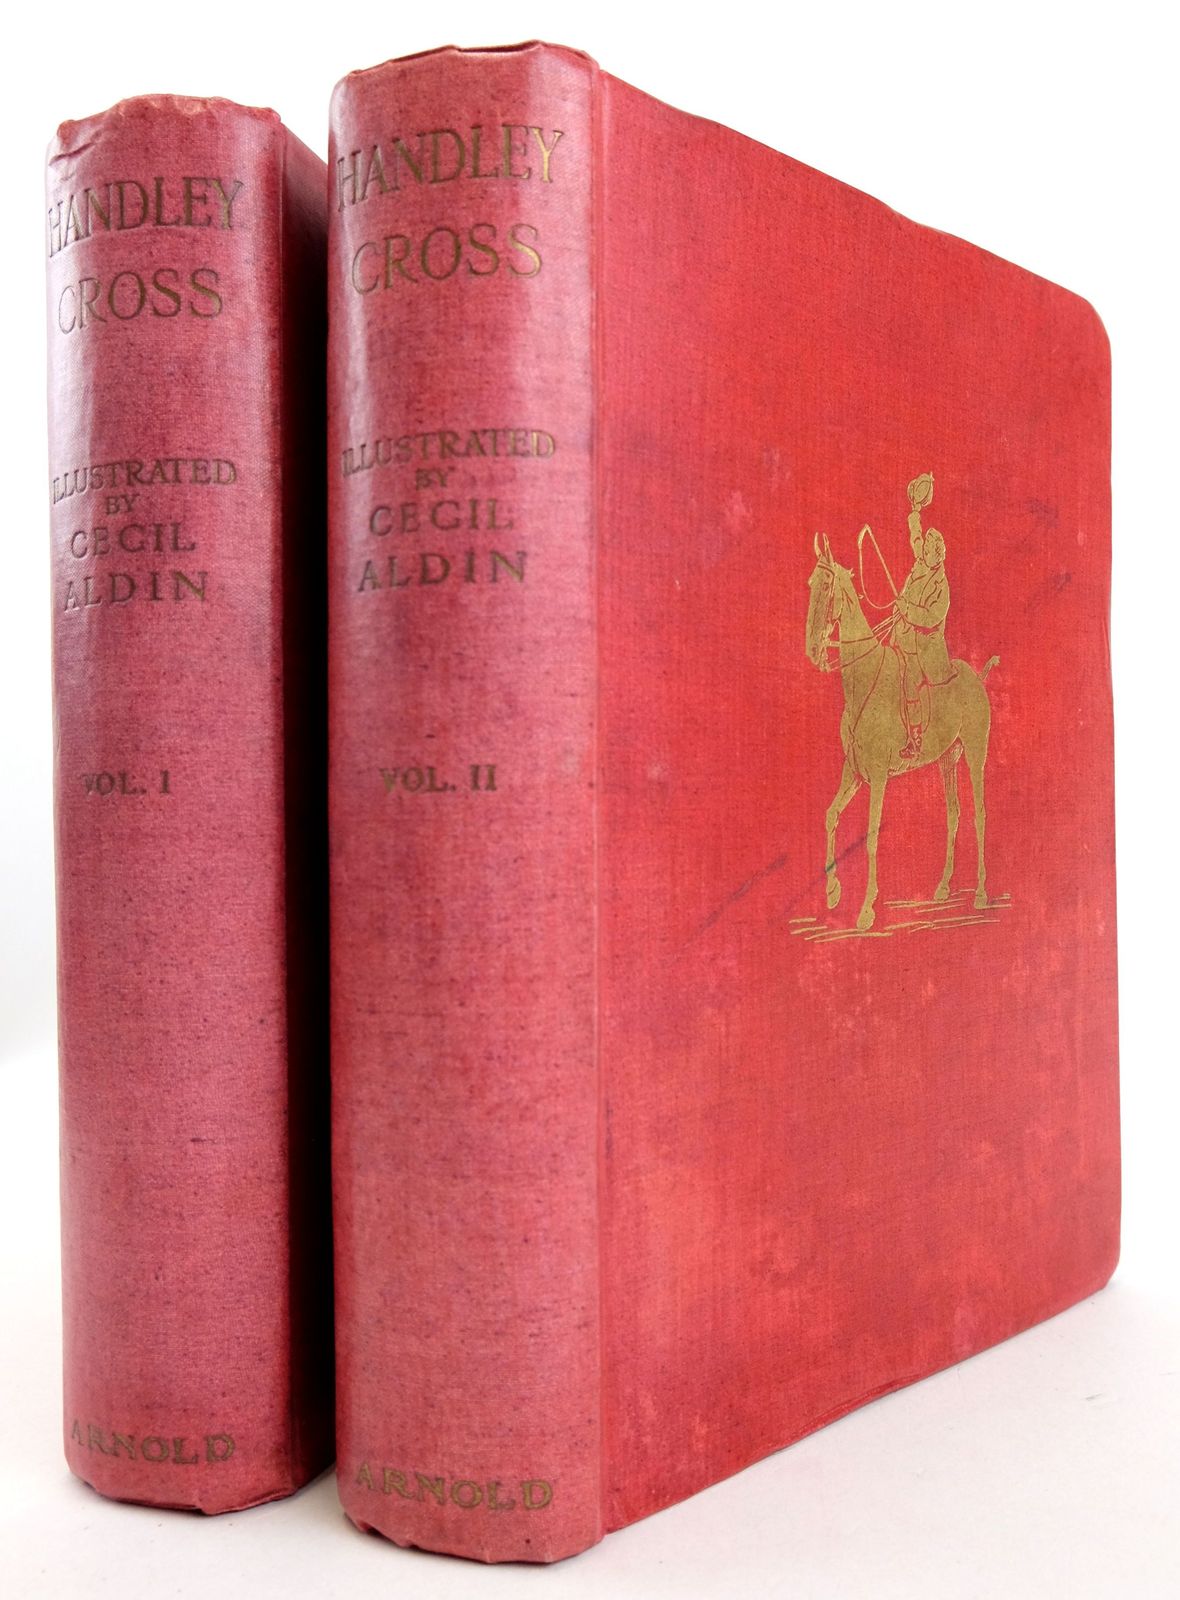 Photo of HANDLEY CROSS OR MR JORROCKS'S HUNT (2 VOLUMES) written by Surtees, R.S. illustrated by Aldin, Cecil published by Edward Arnold (STOCK CODE: 1819645)  for sale by Stella & Rose's Books